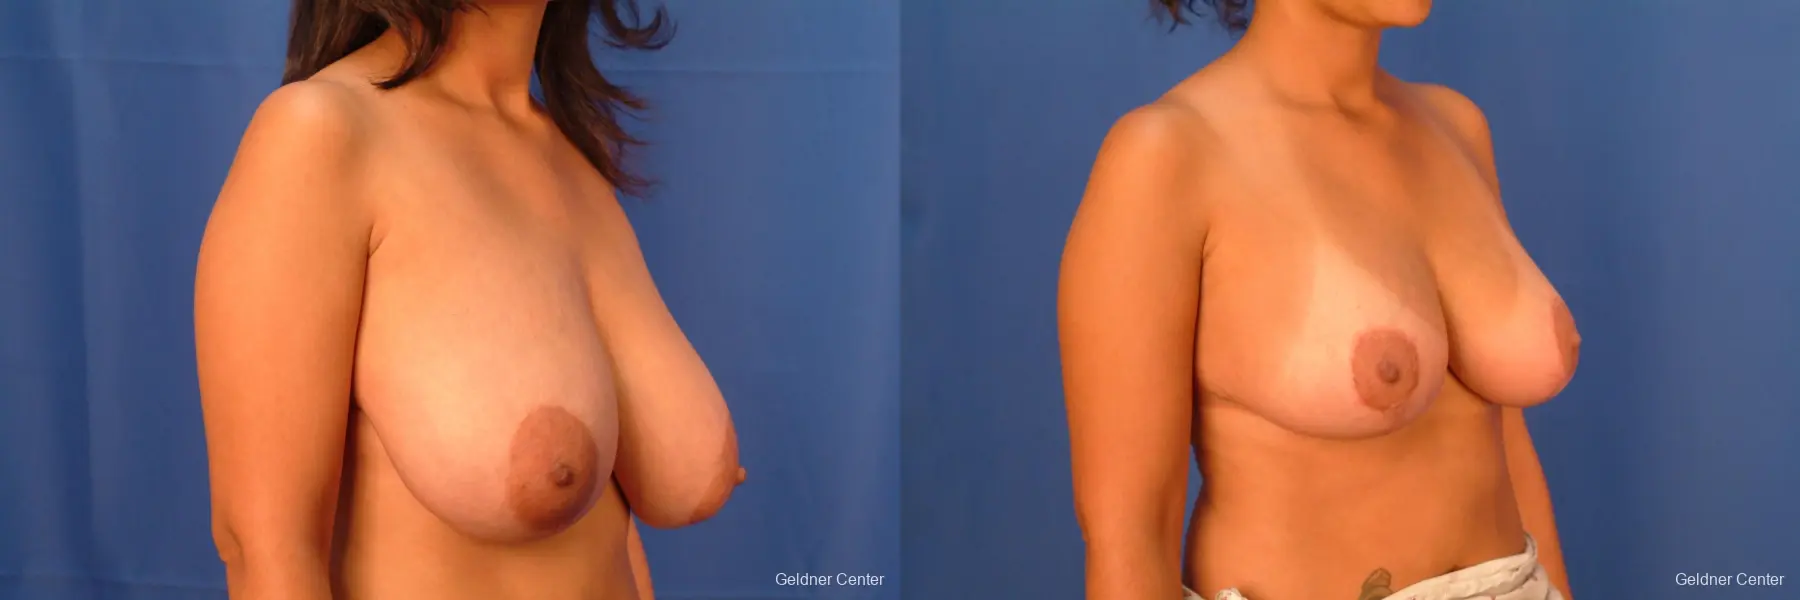 Breast Reduction Lake Shore Dr, Chicago 2417 - Before and After 2